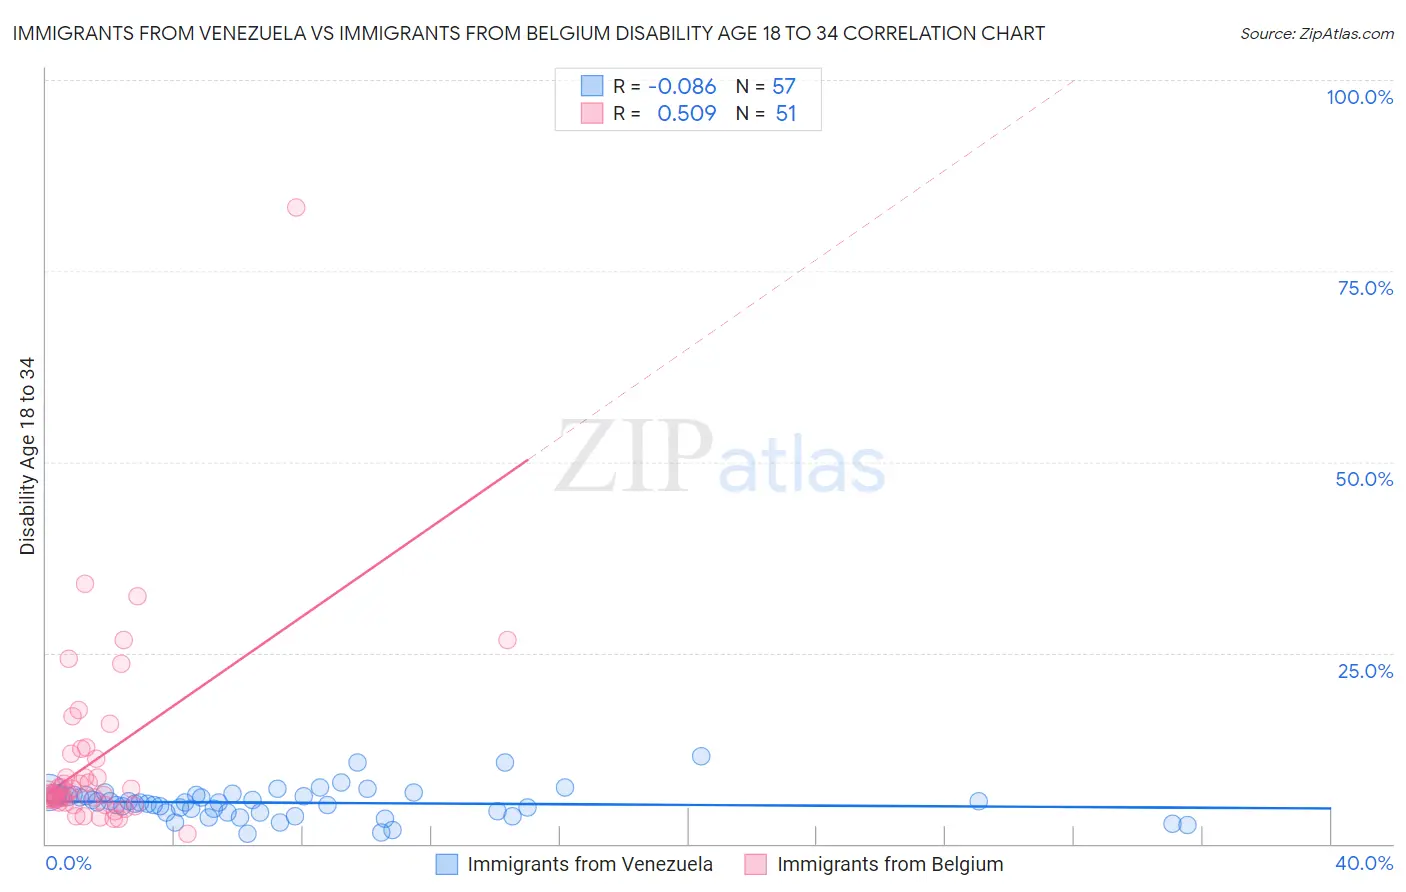 Immigrants from Venezuela vs Immigrants from Belgium Disability Age 18 to 34